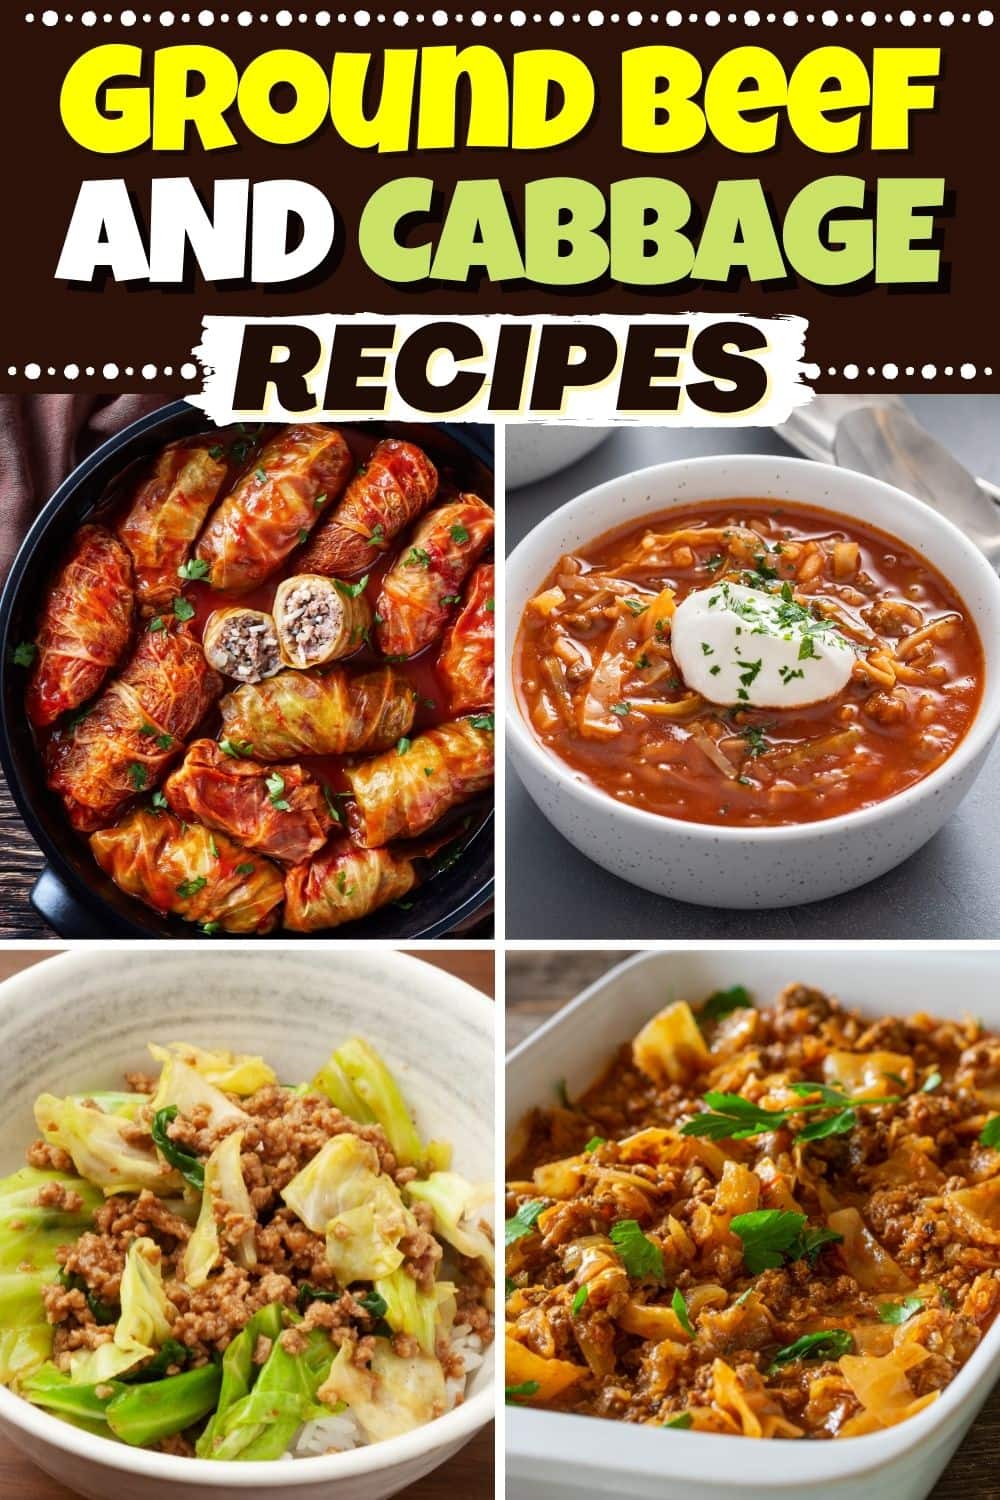 10 Best Ground Beef and Cabbage Recipes - Insanely Good